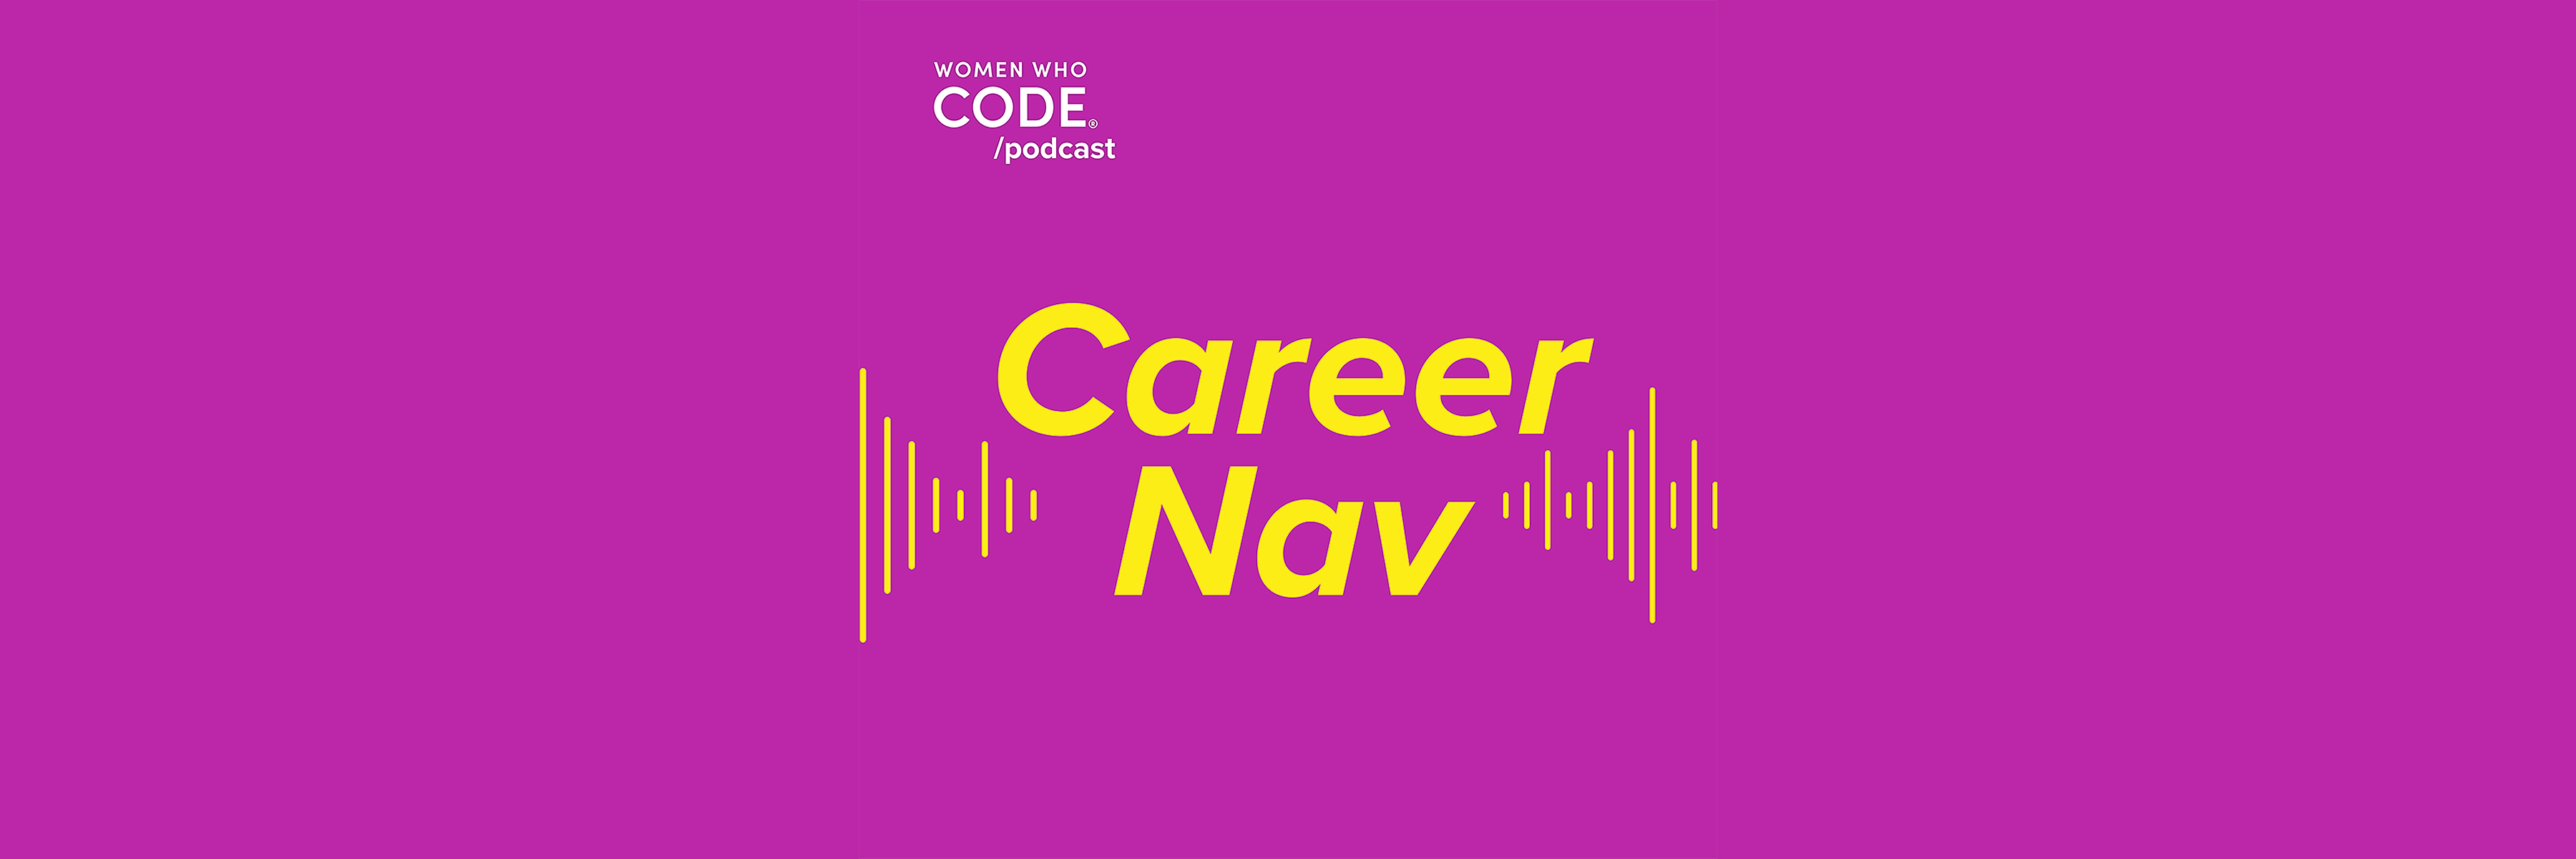 Career Nav #50: Moving Into Management or Staying an Individual Contributor